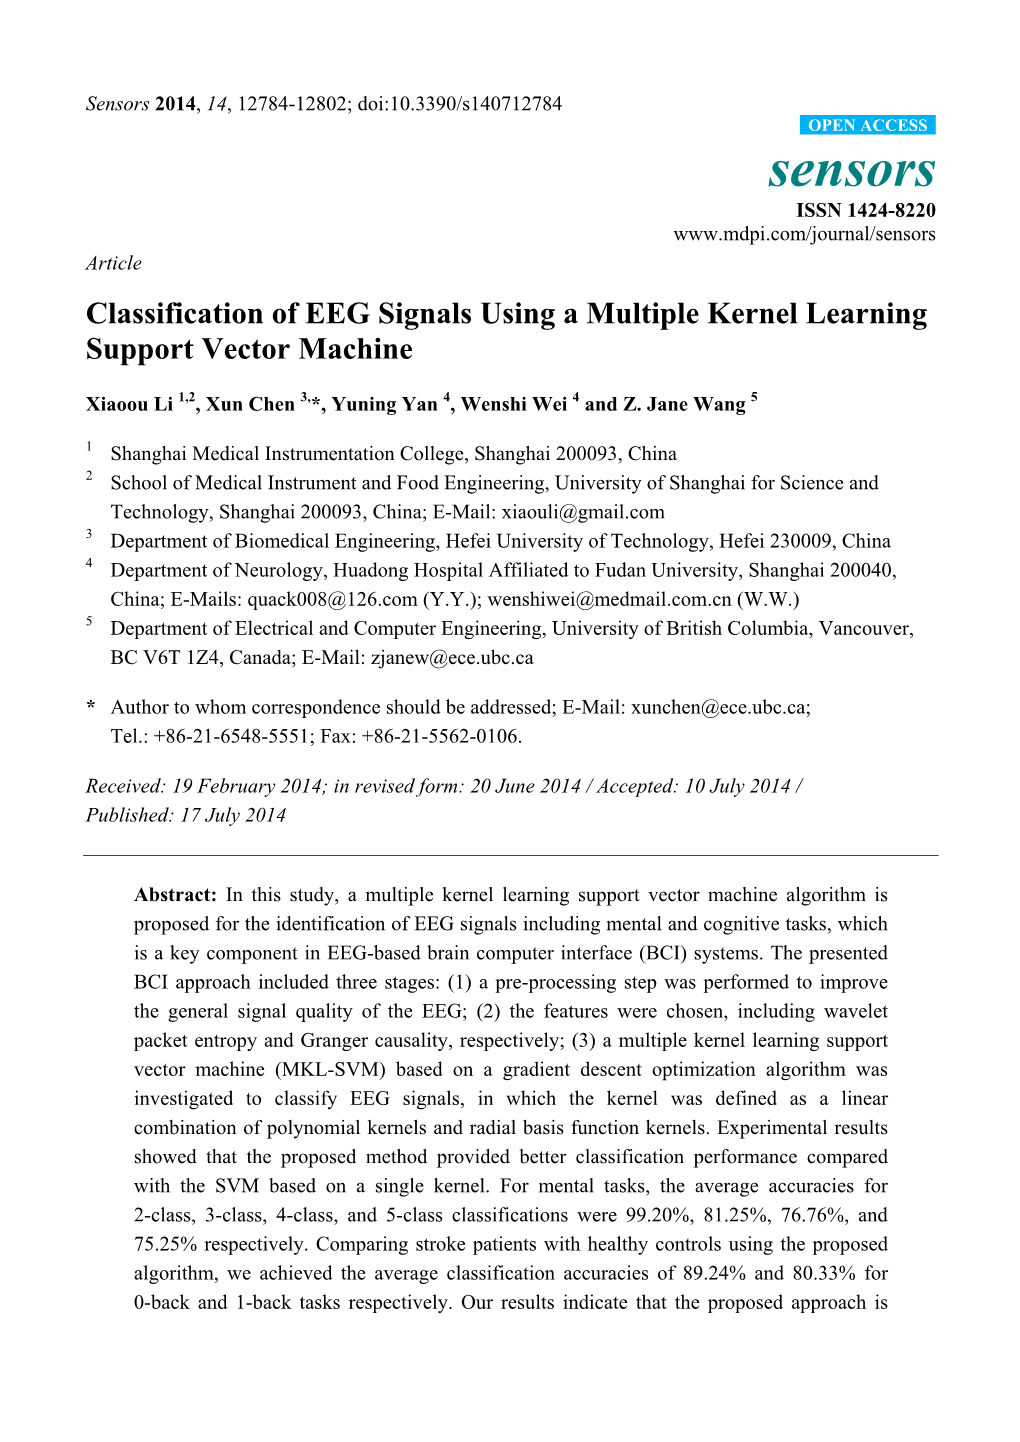 Classification of EEG Signals Using a Multiple Kernel Learning Support Vector Machine